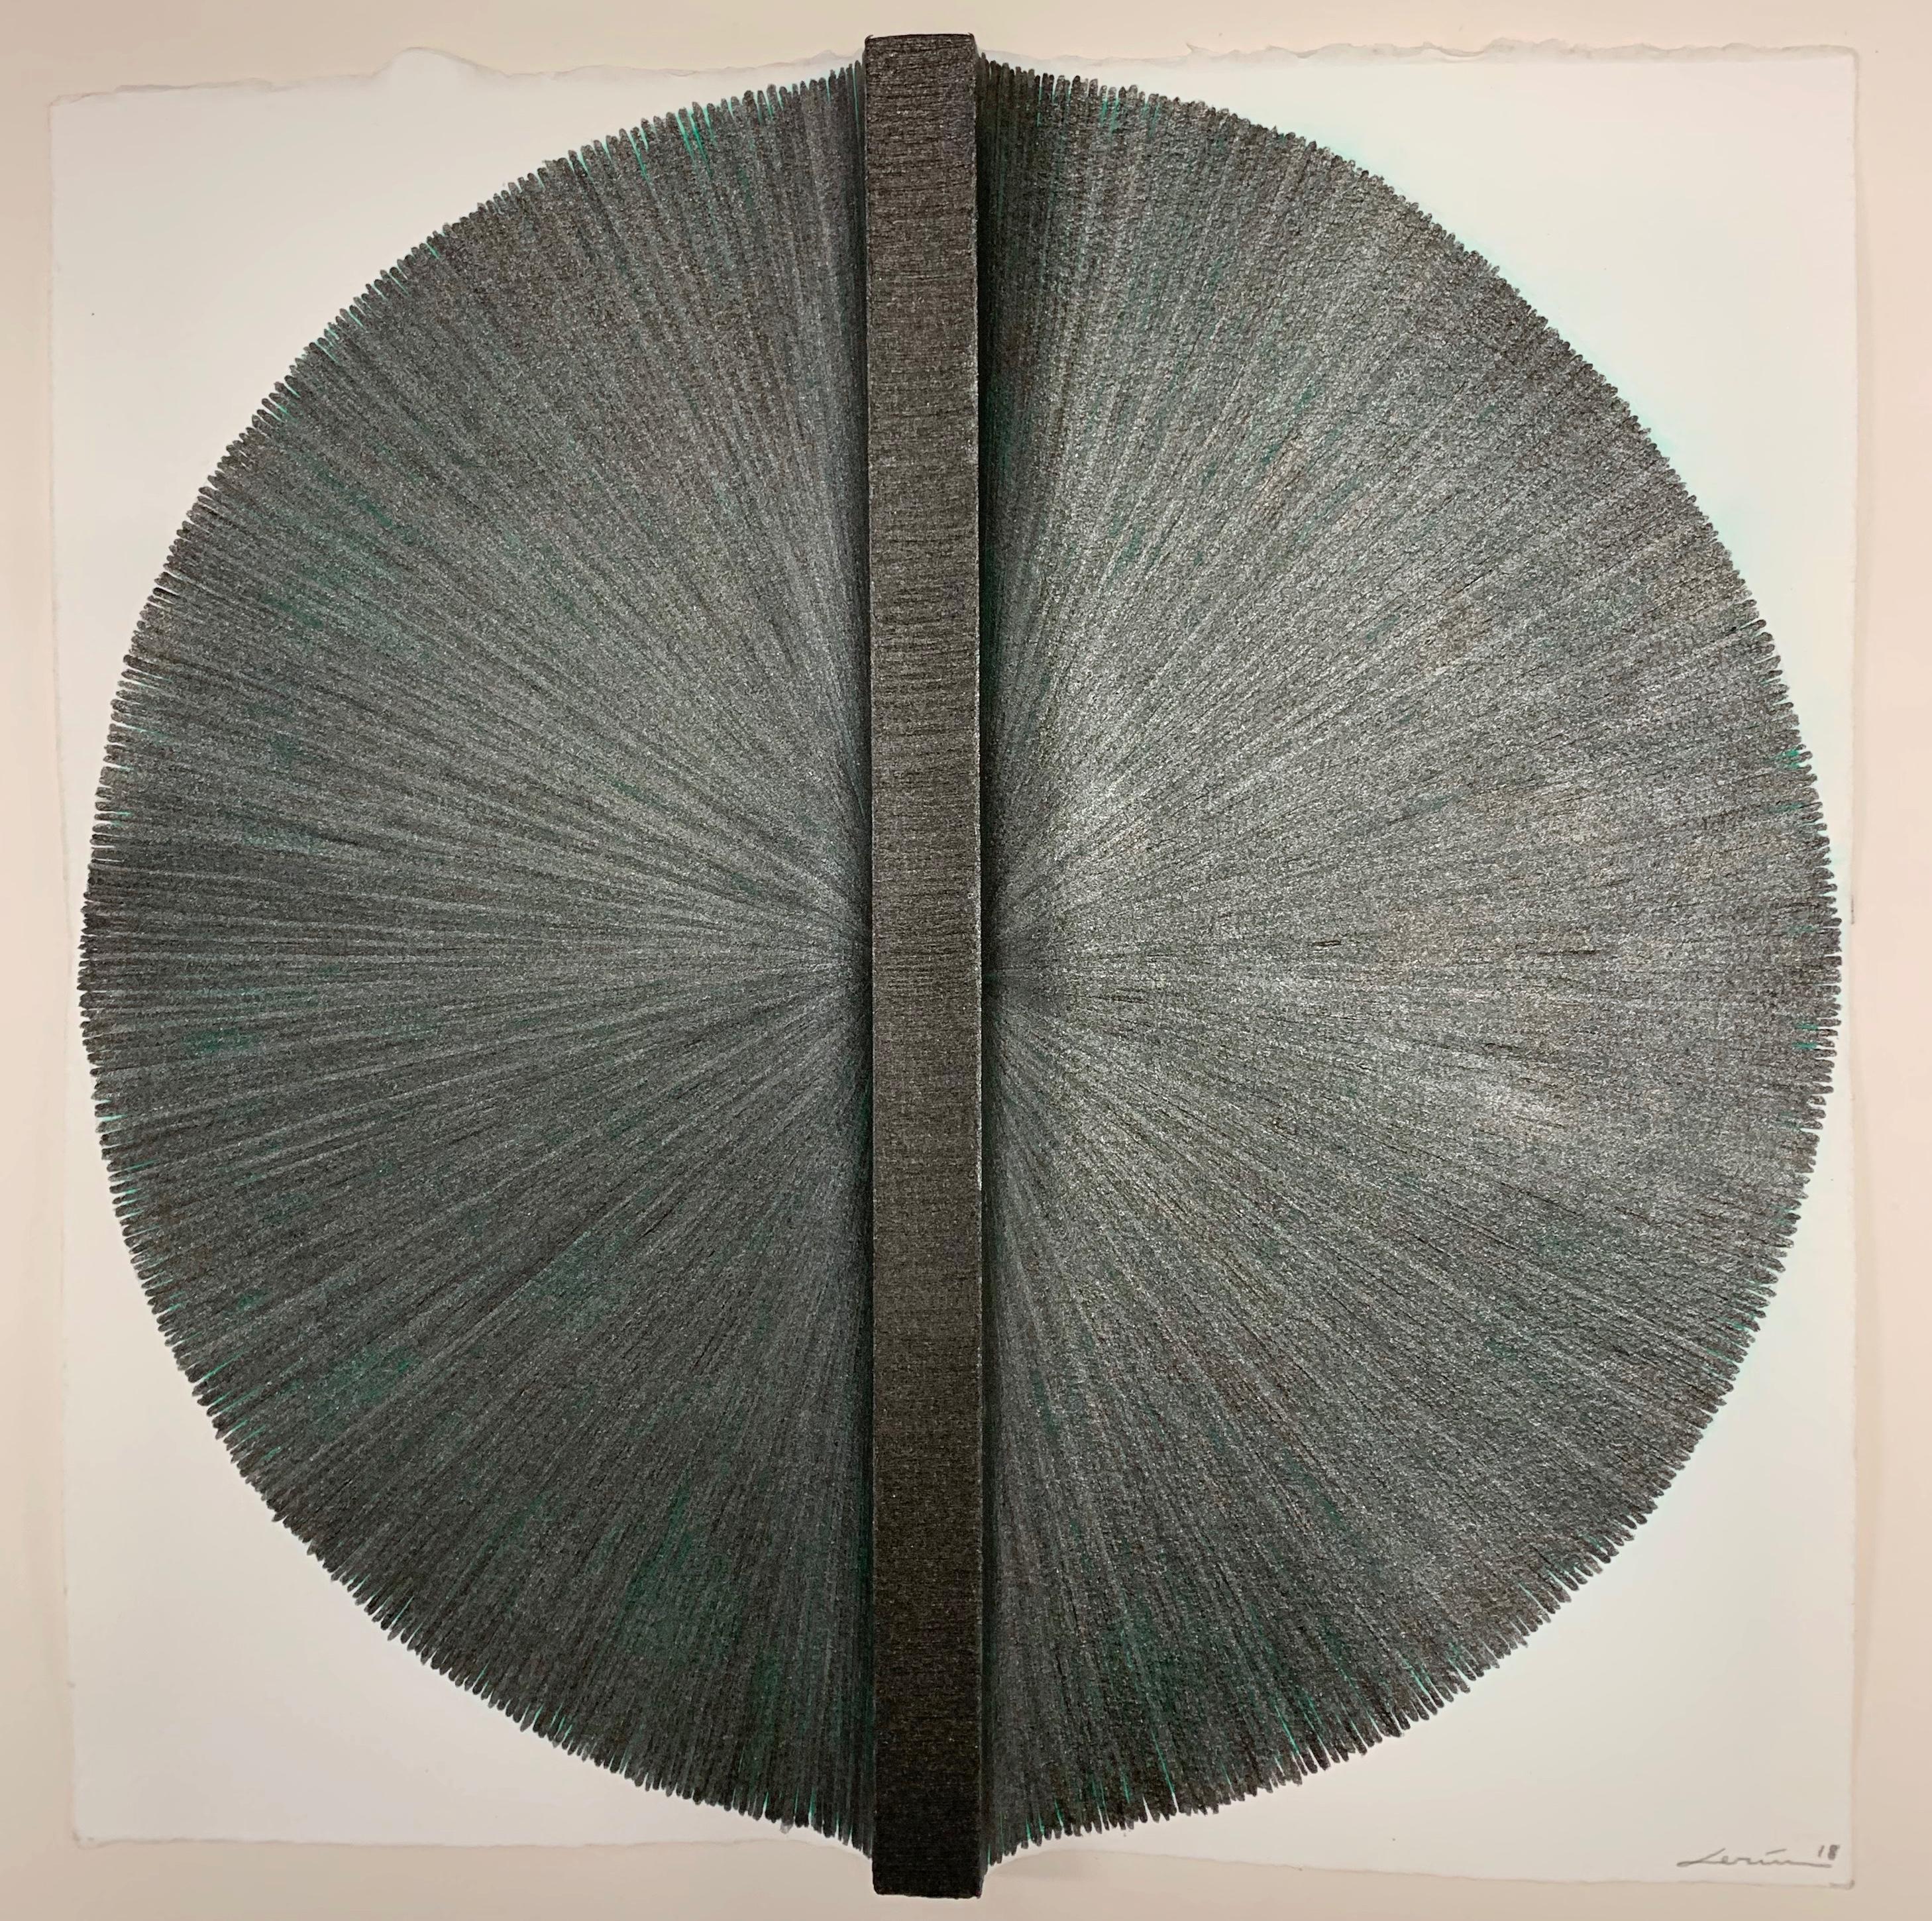 Solid Rod X: Silver Circle Painting on paper and wood by Silvia Lerin